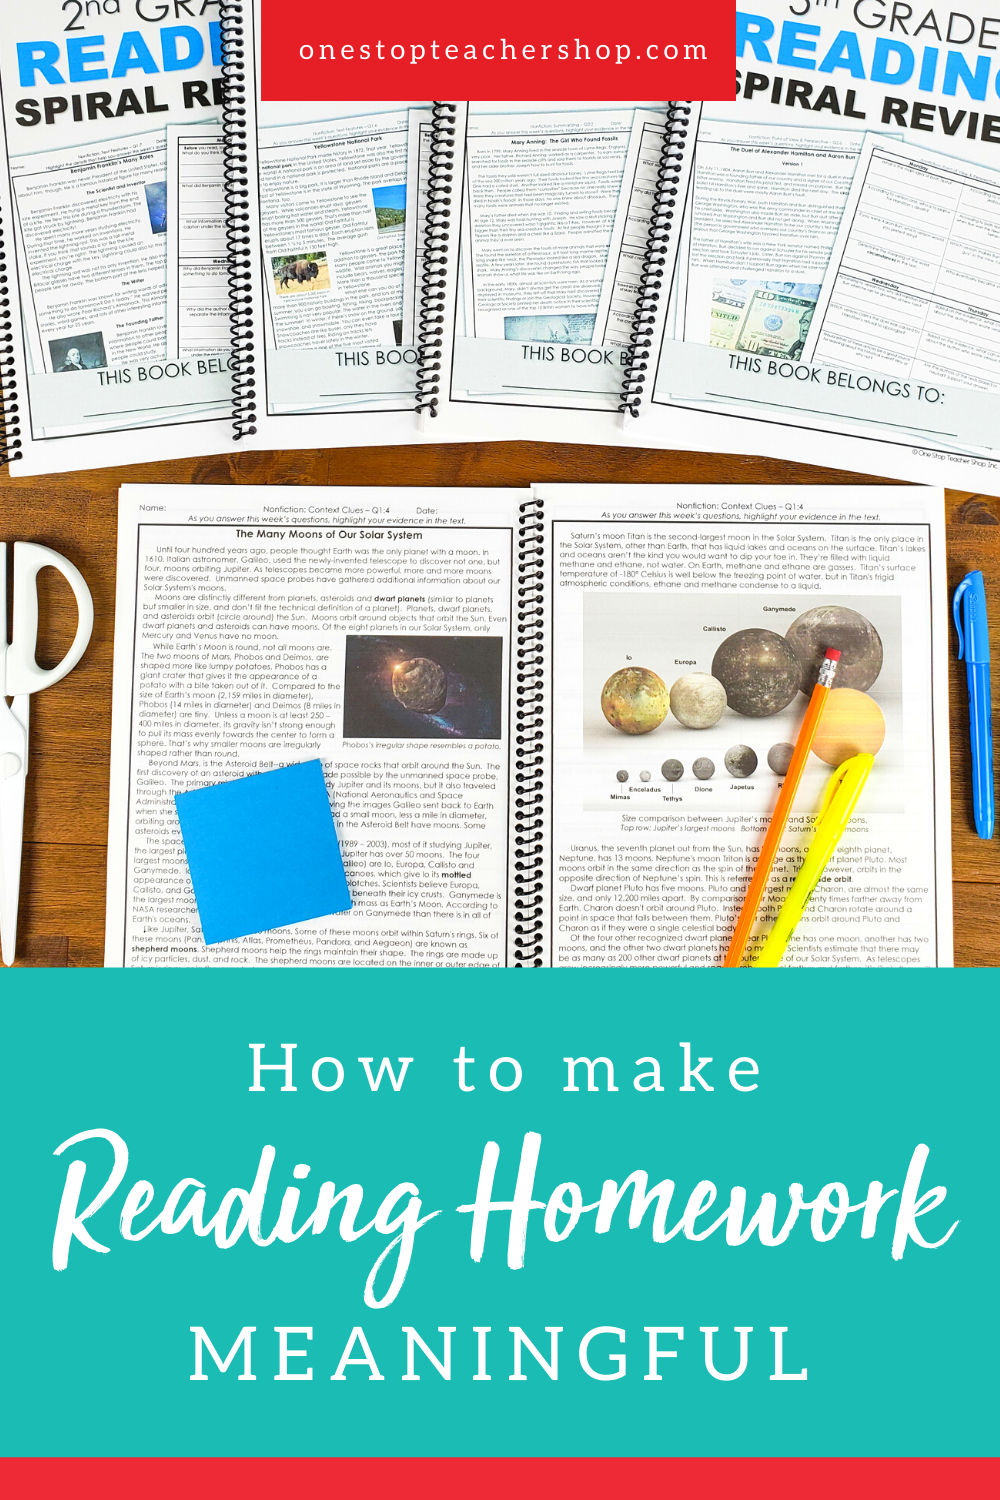 homework reading meaning